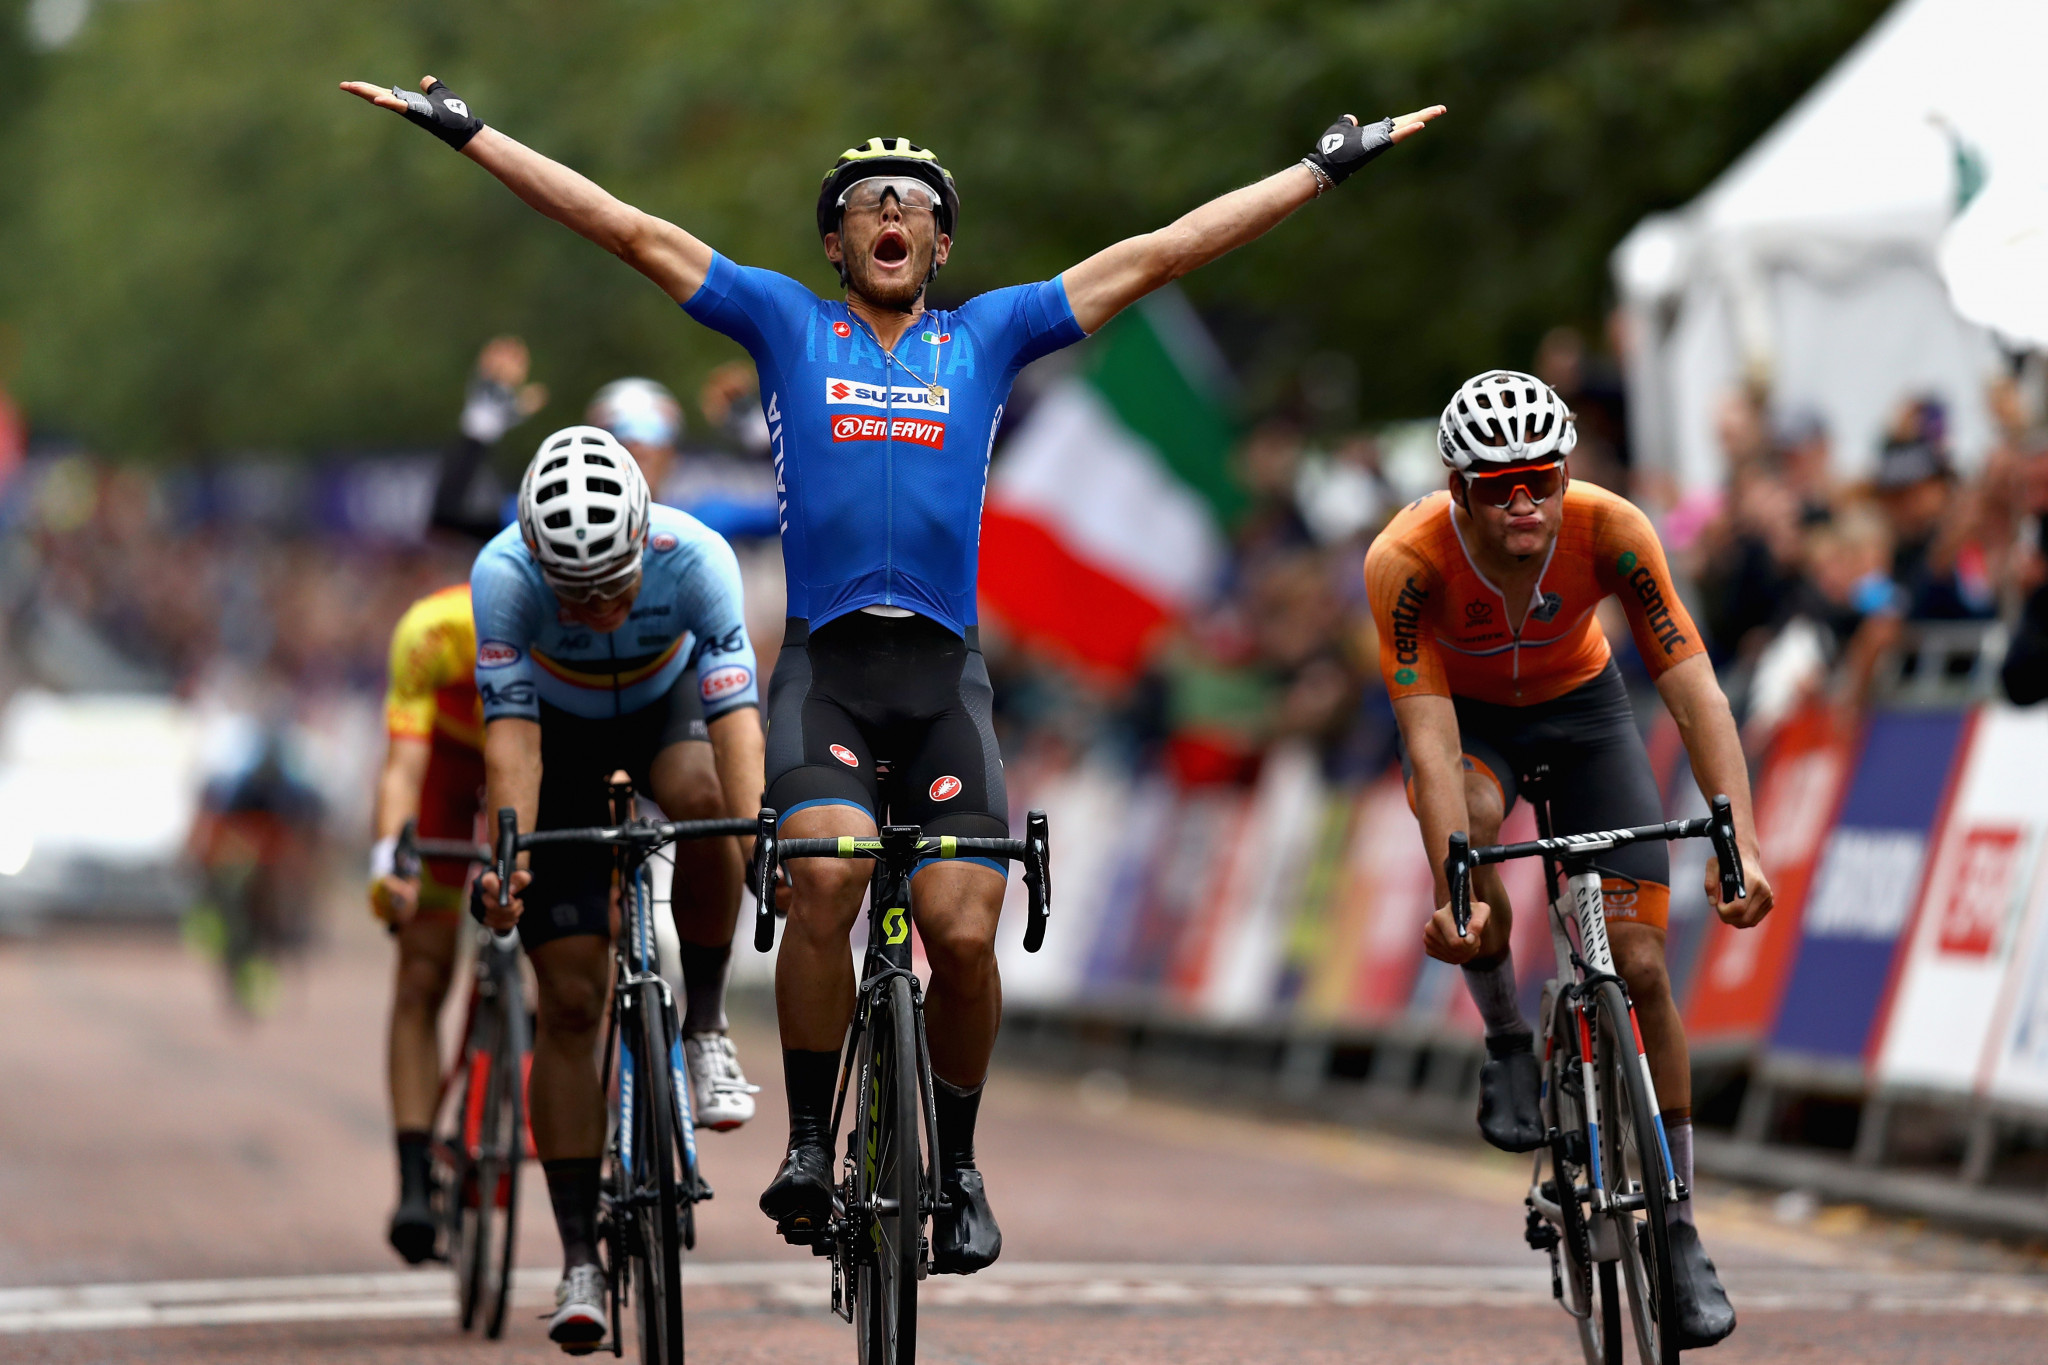 Matteo Trentin made it a double success for Italy in the road cycling races by winning the men's event ©Getty Images